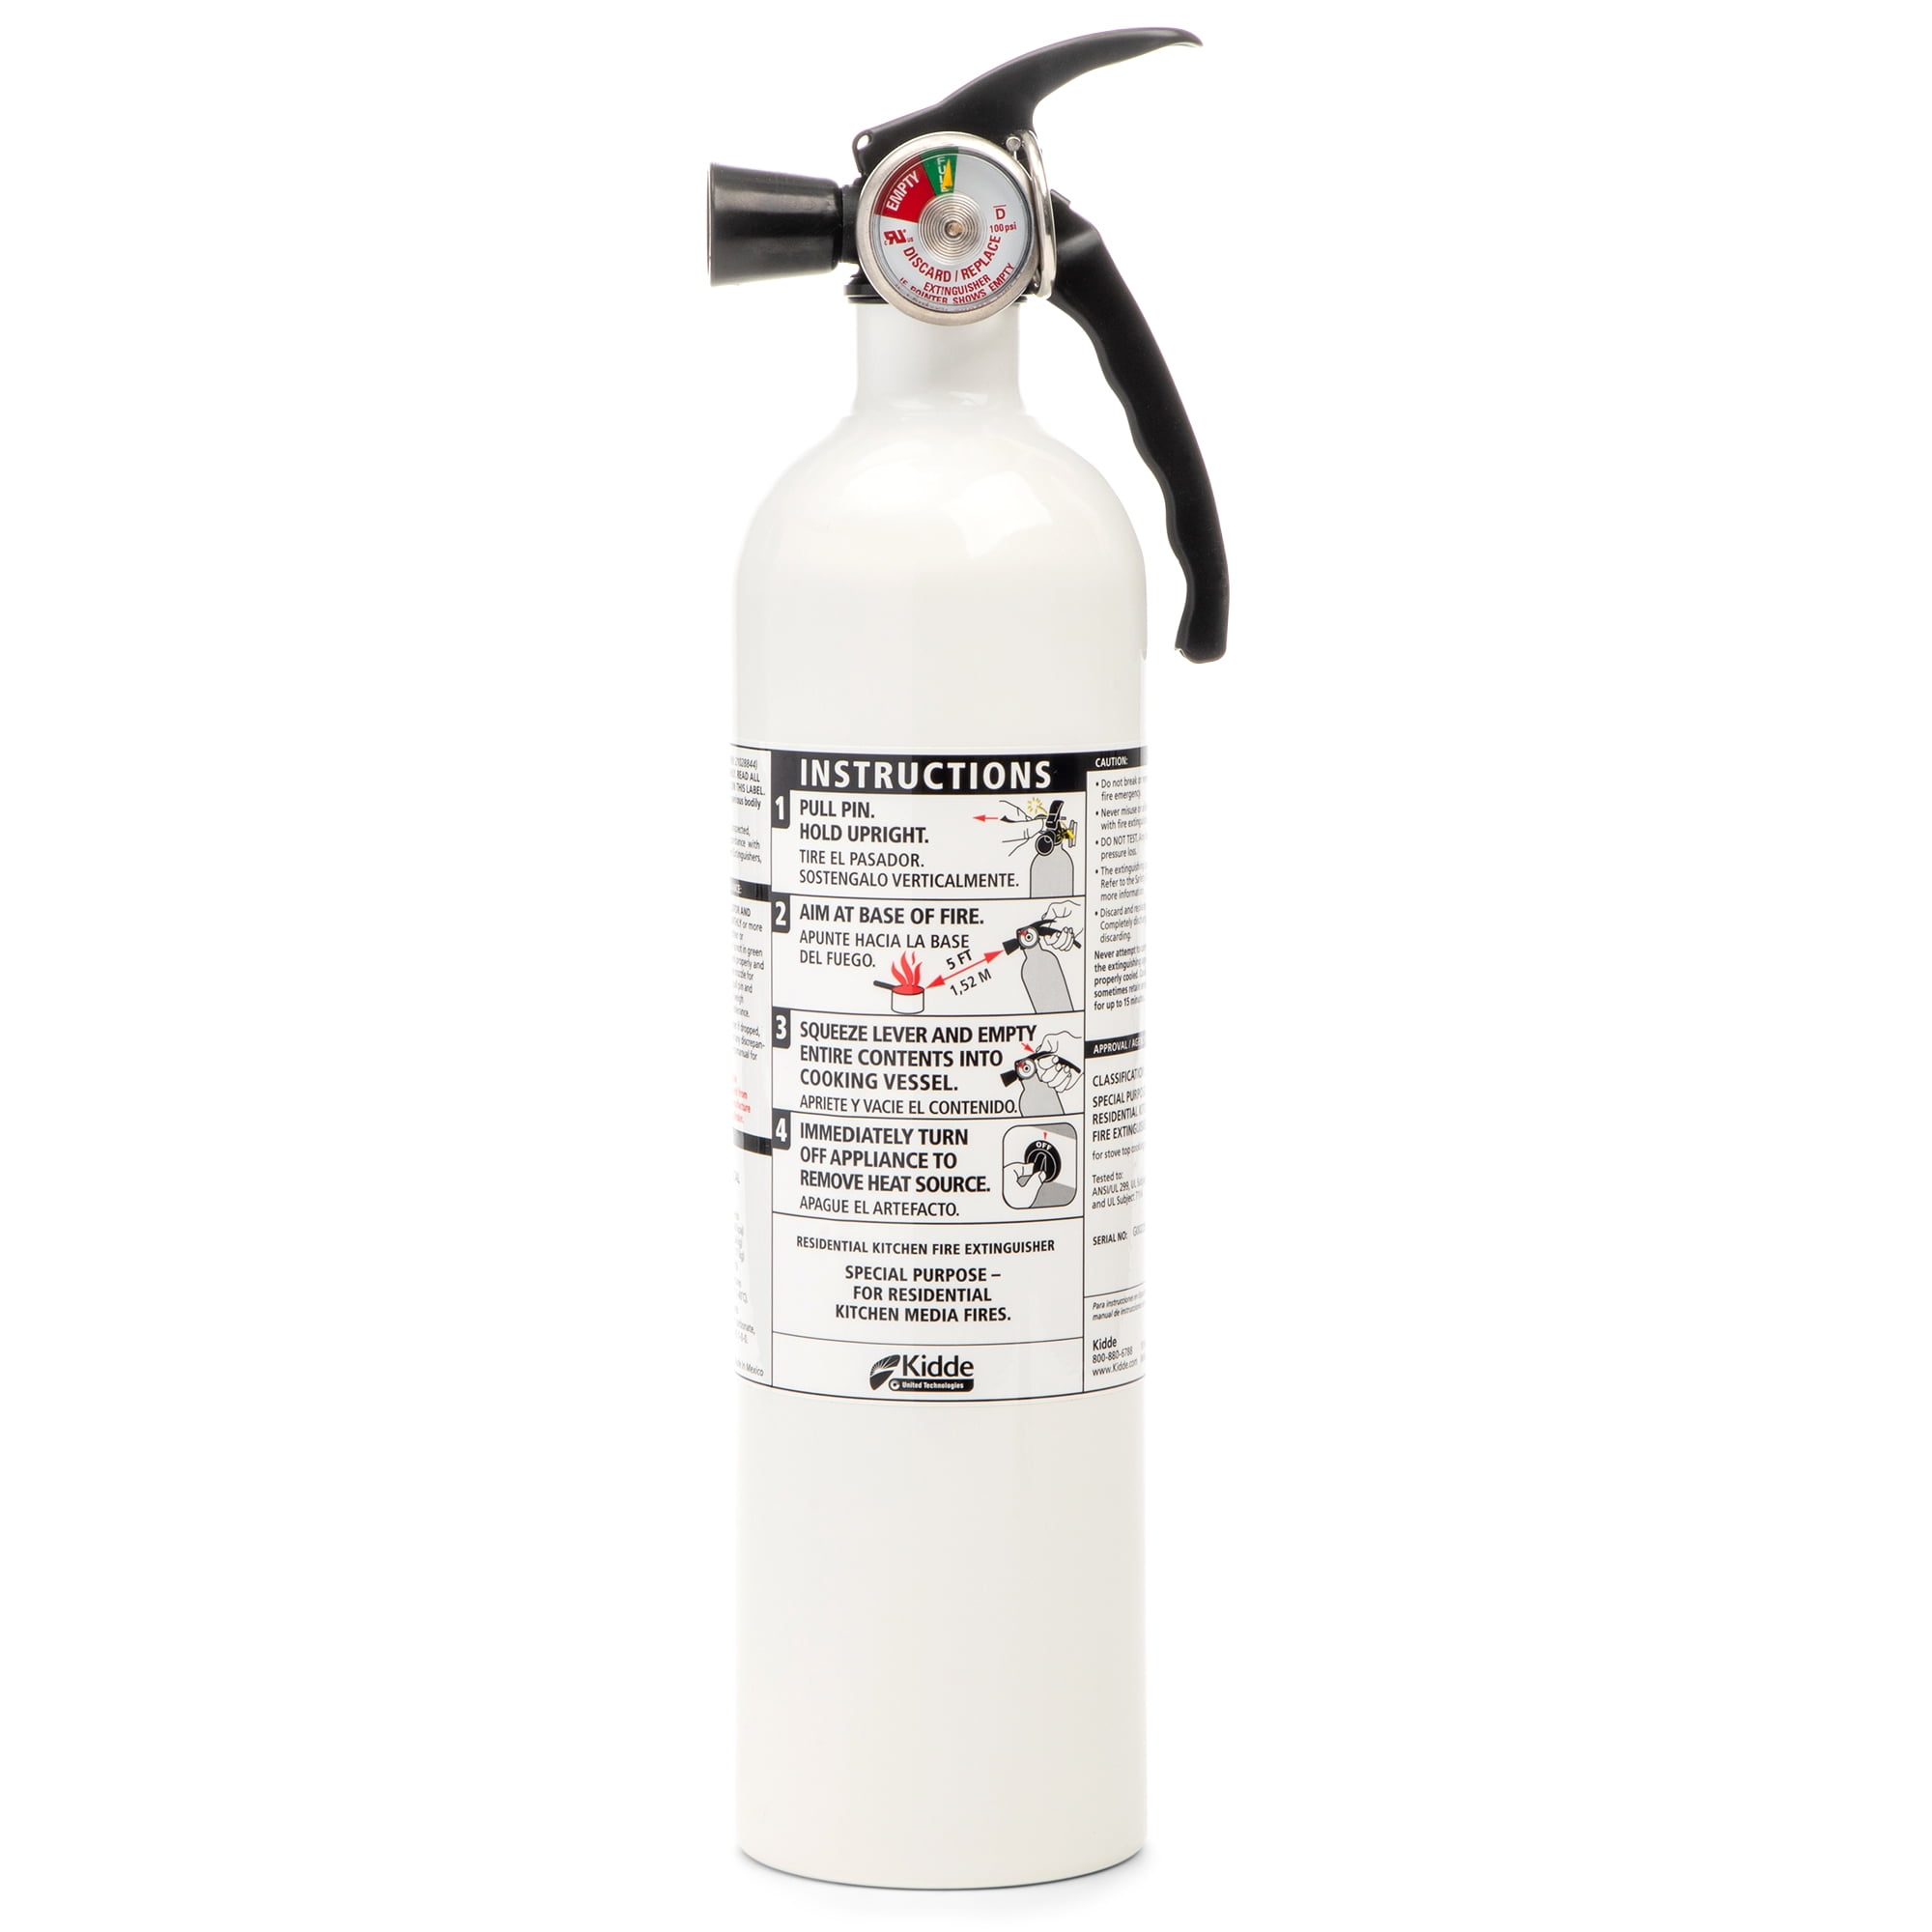 3lb Fire Extinguisher Disposable Marine Home Car Office Safety Kidde 5-b C for sale online